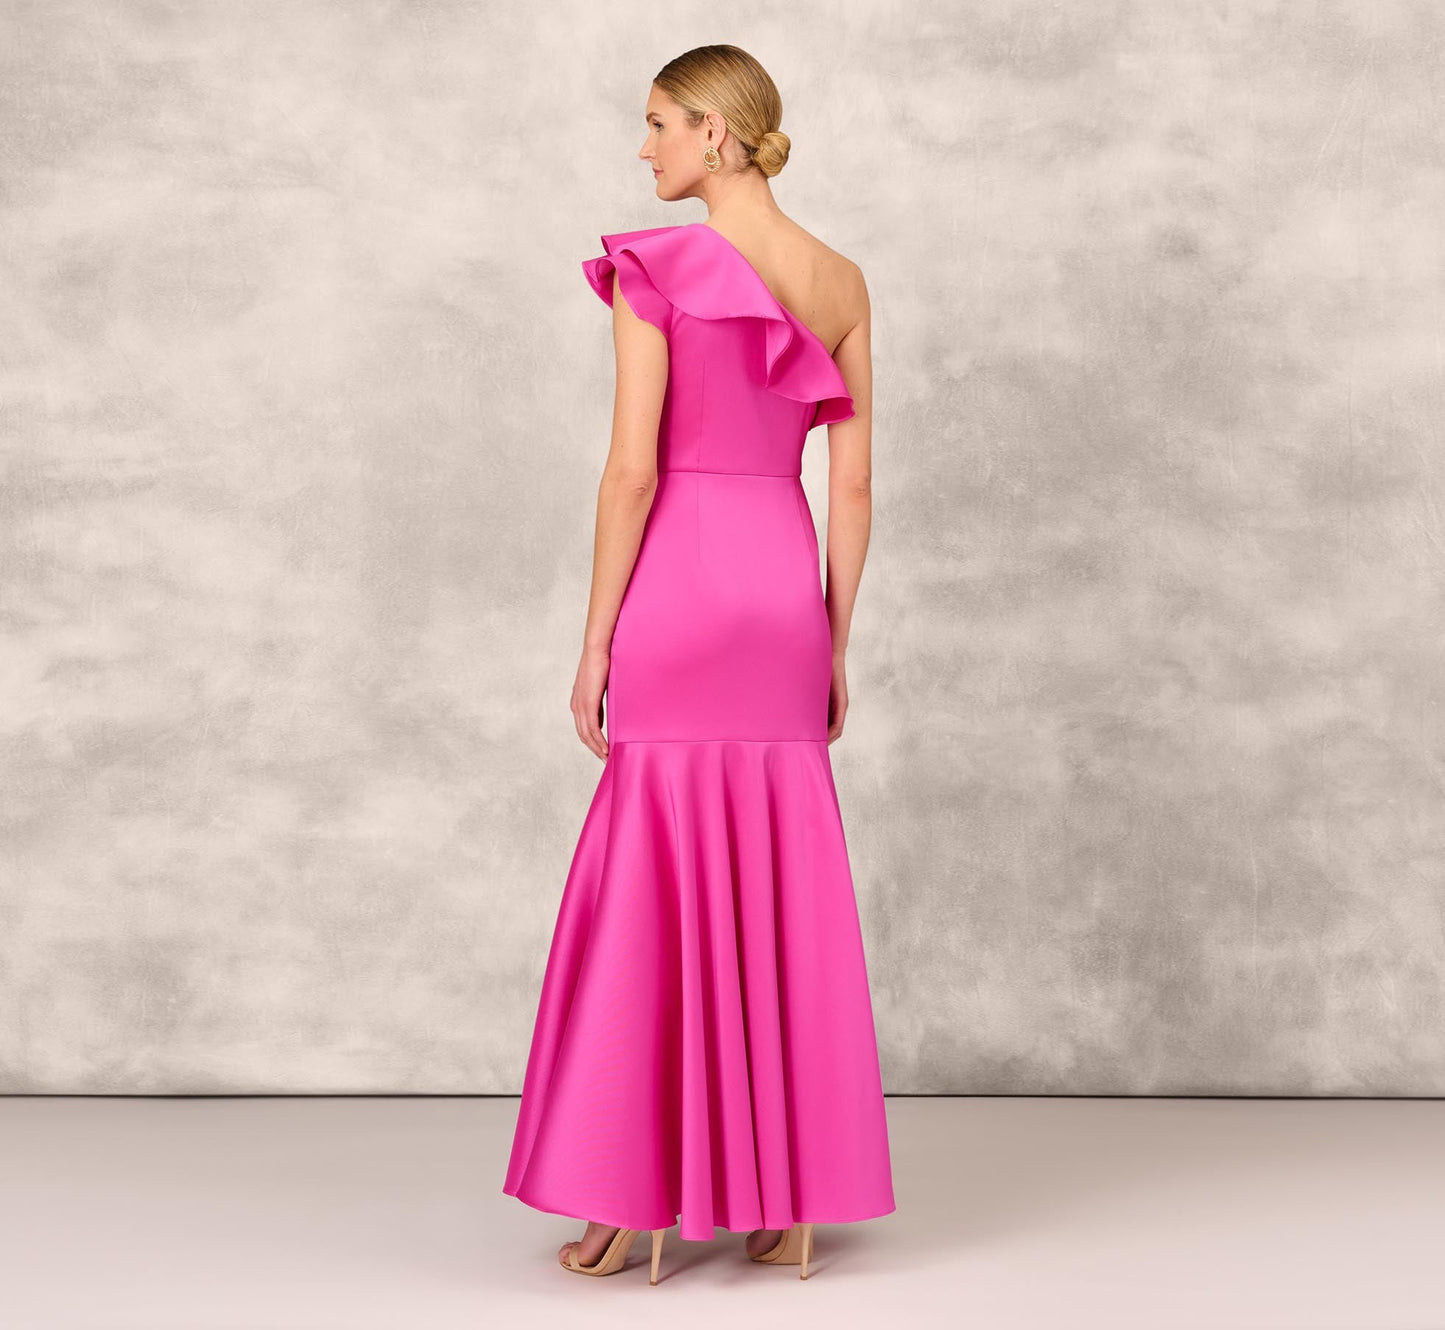 Adrianna Papell One Shoulder Ruffle Mermaid Gown